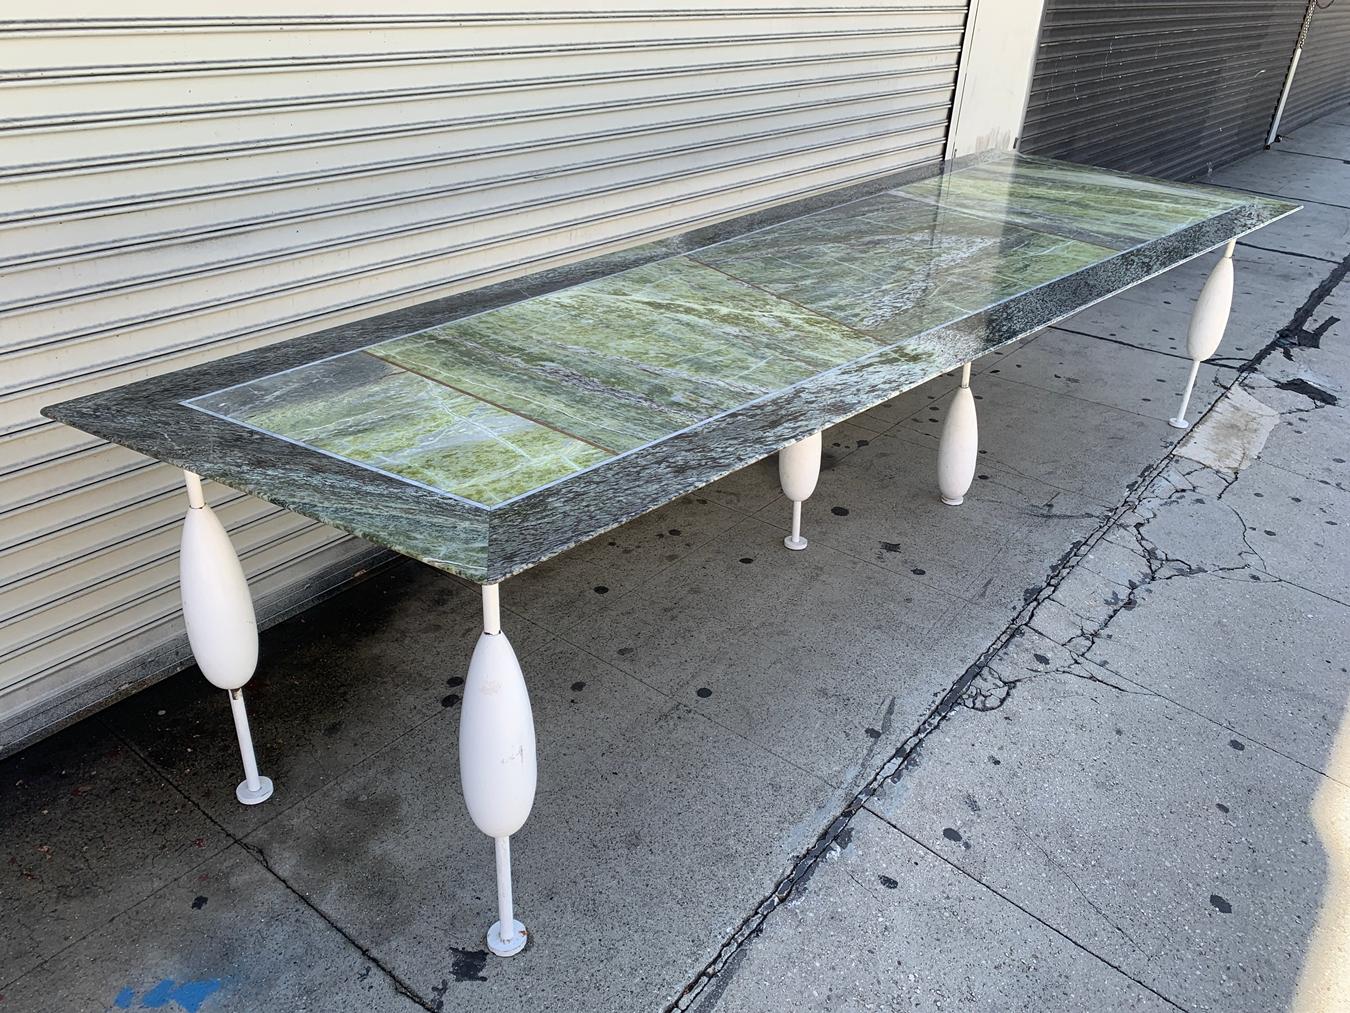 Monumental custom post-modern dining table with painted metal base and marble top by Sema Topaloglu, Turkey, 1990s.

The table has an assymetrical shape measuring just over 11 ft in length.

The base is made in solid steel powder coated in white